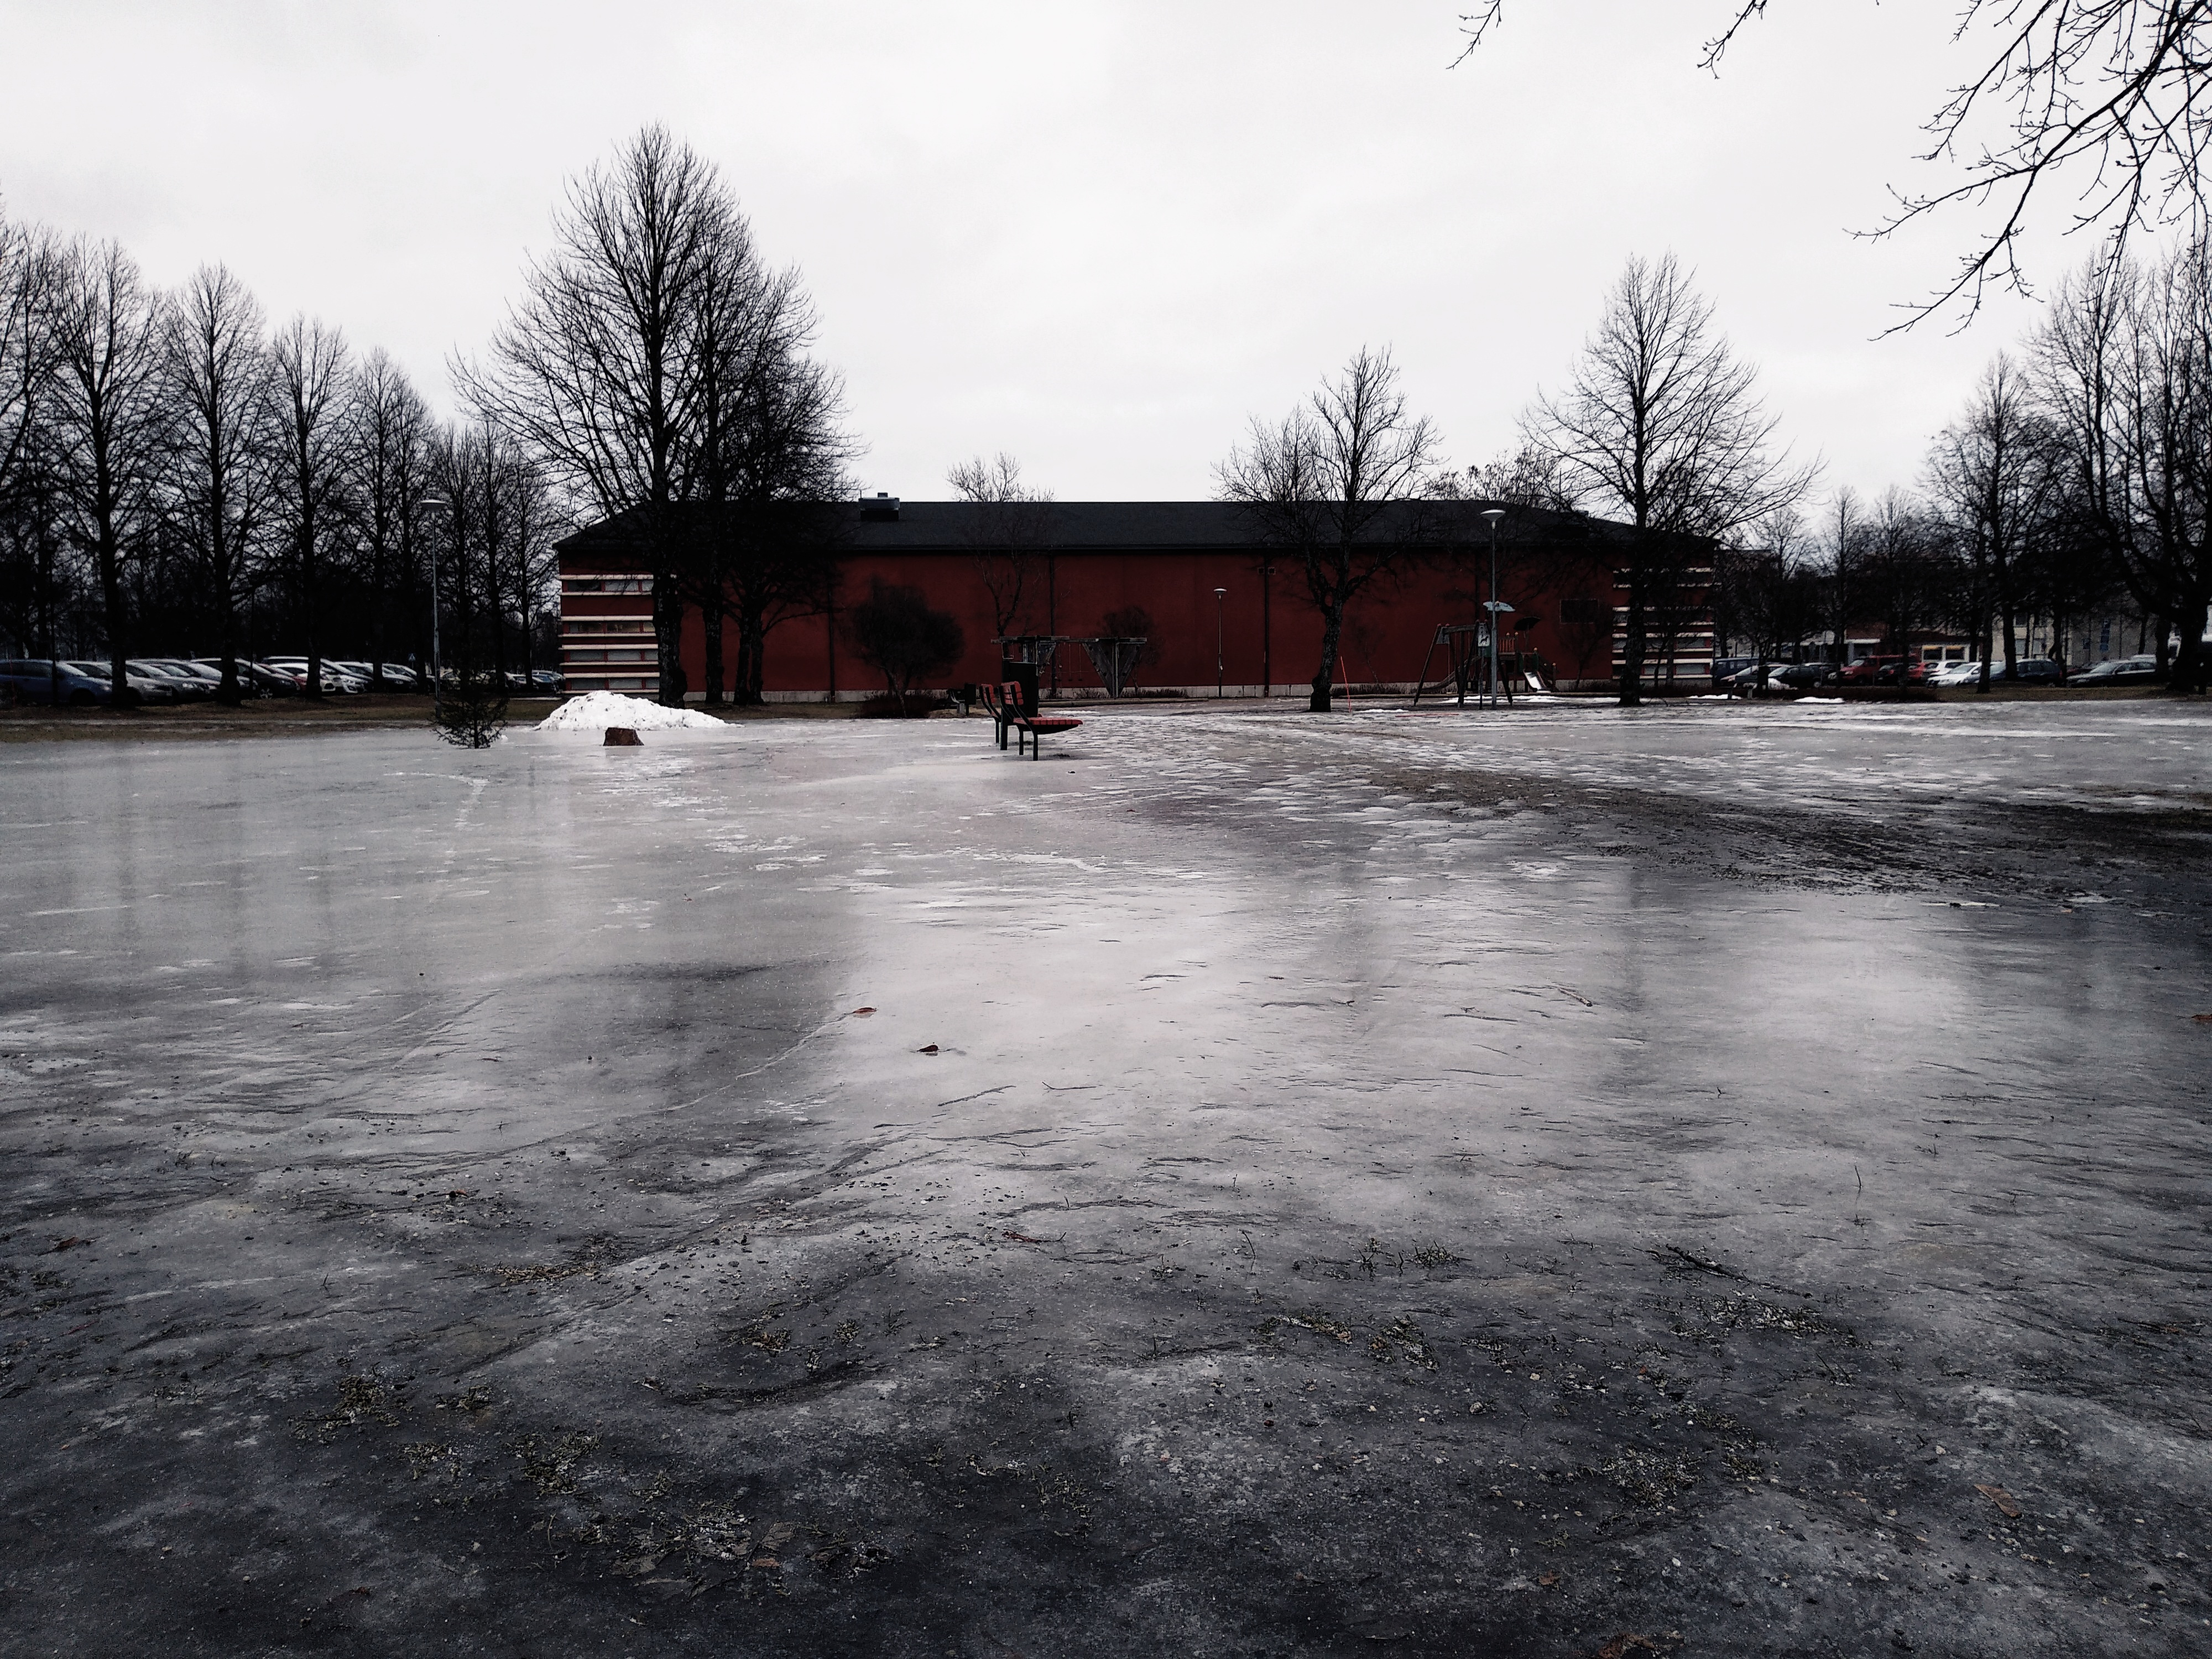 A public park in Joensuu, Finland, covered by ice